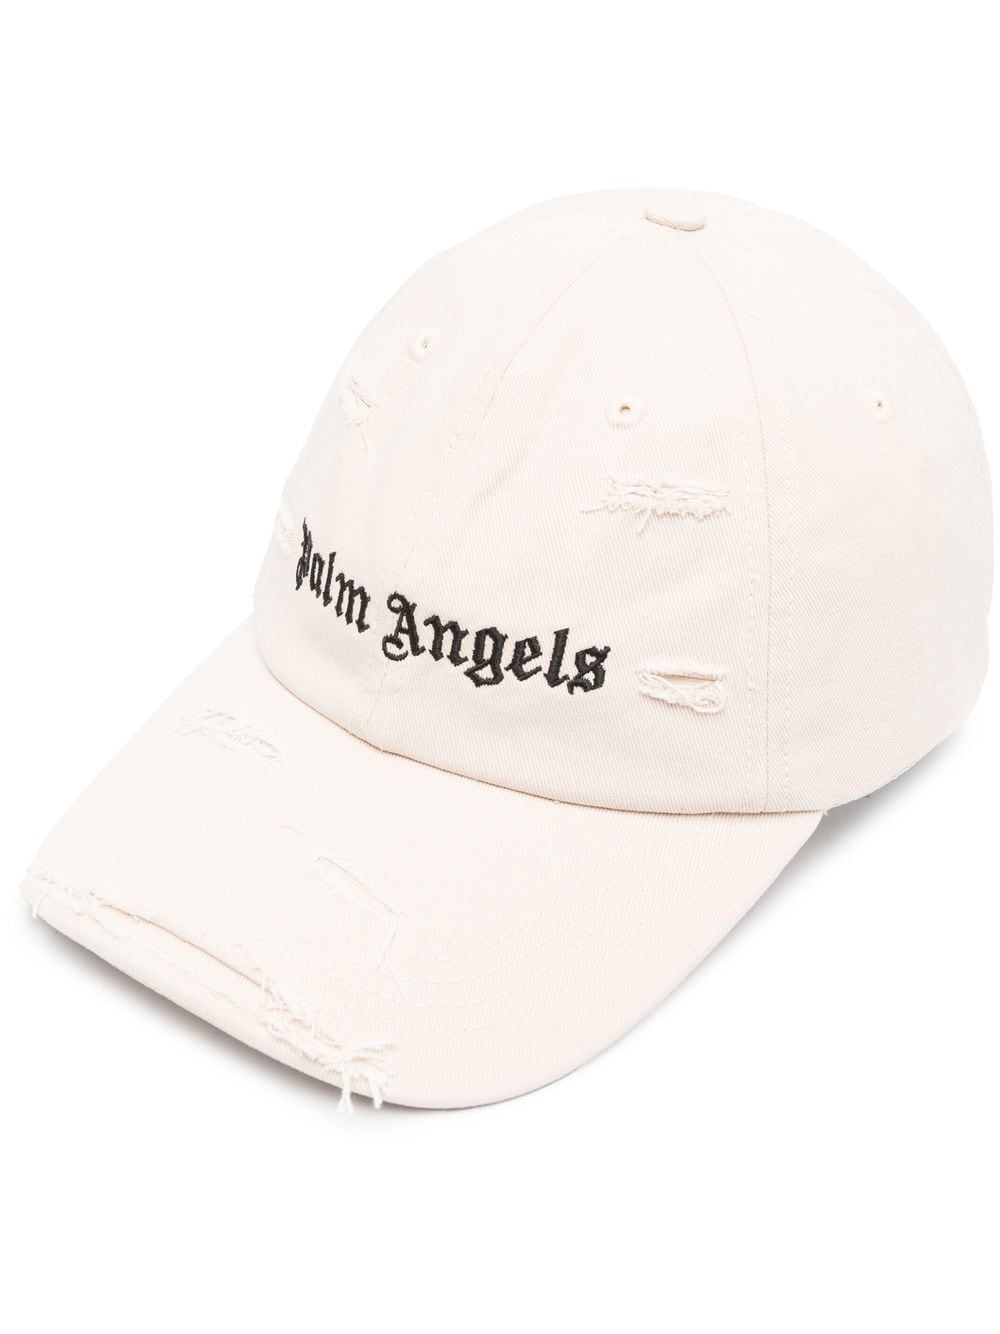 palm angels PMLB091S23FAB001 6110 BEIGE/BLACK available on ...